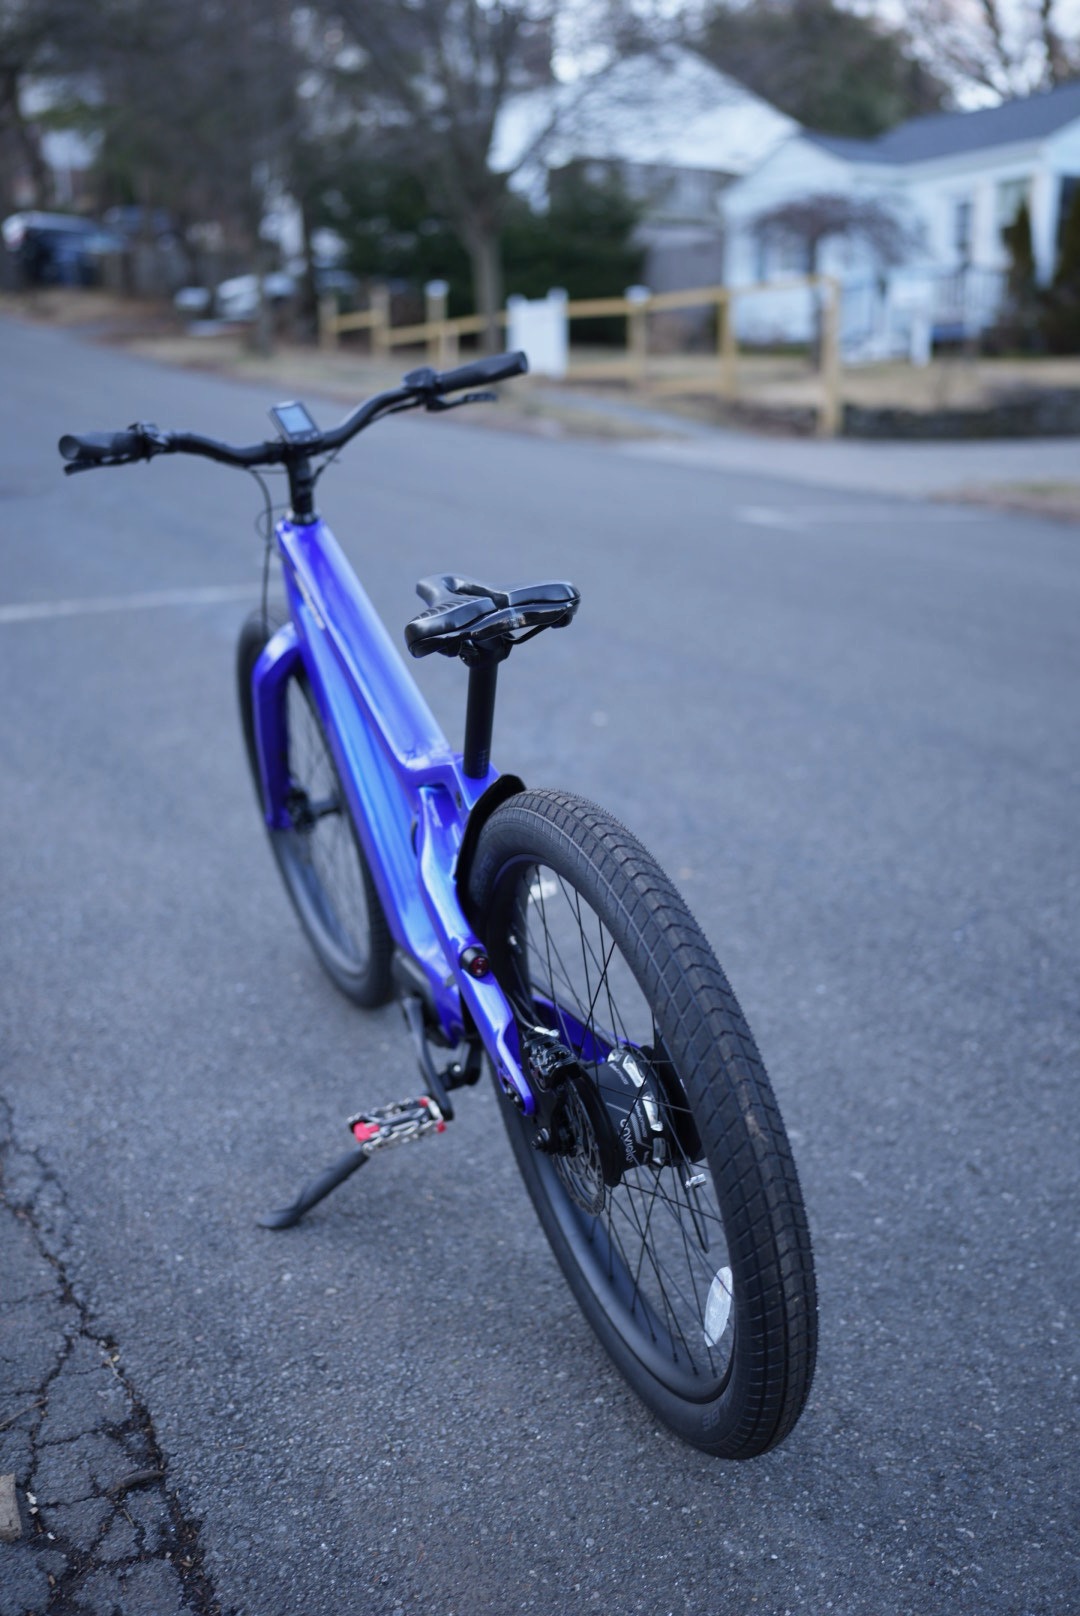 The Ride – A perfect eBike, for its ideal customer